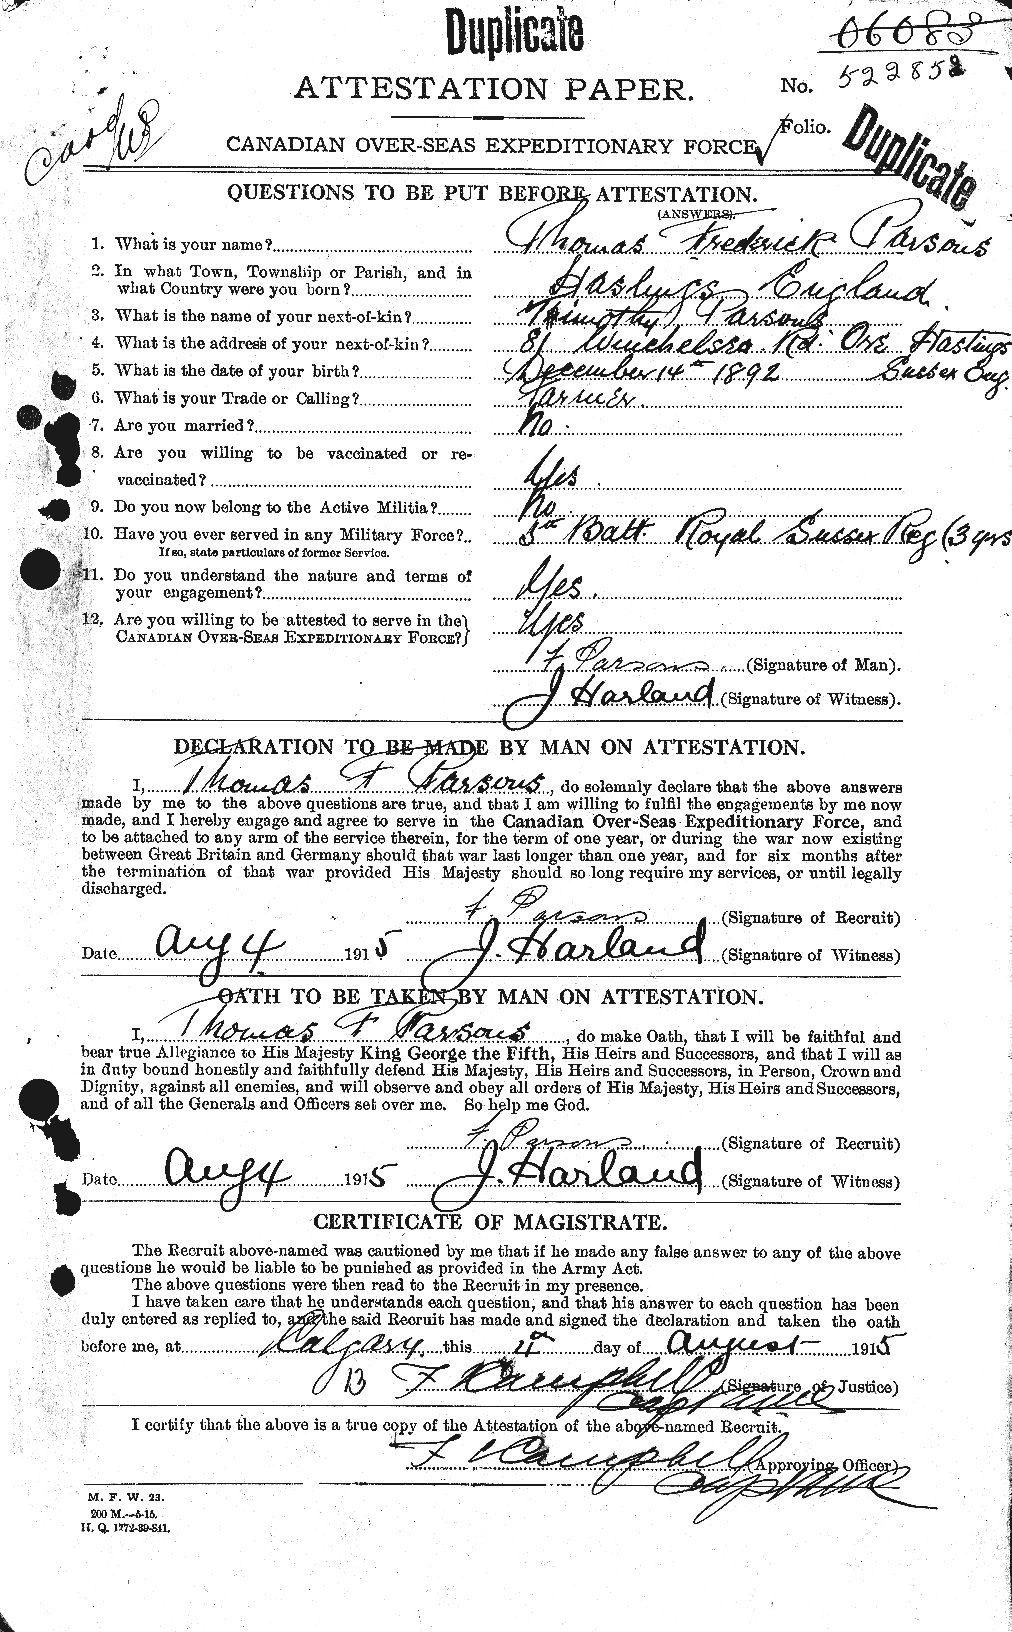 Personnel Records of the First World War - CEF 567000a